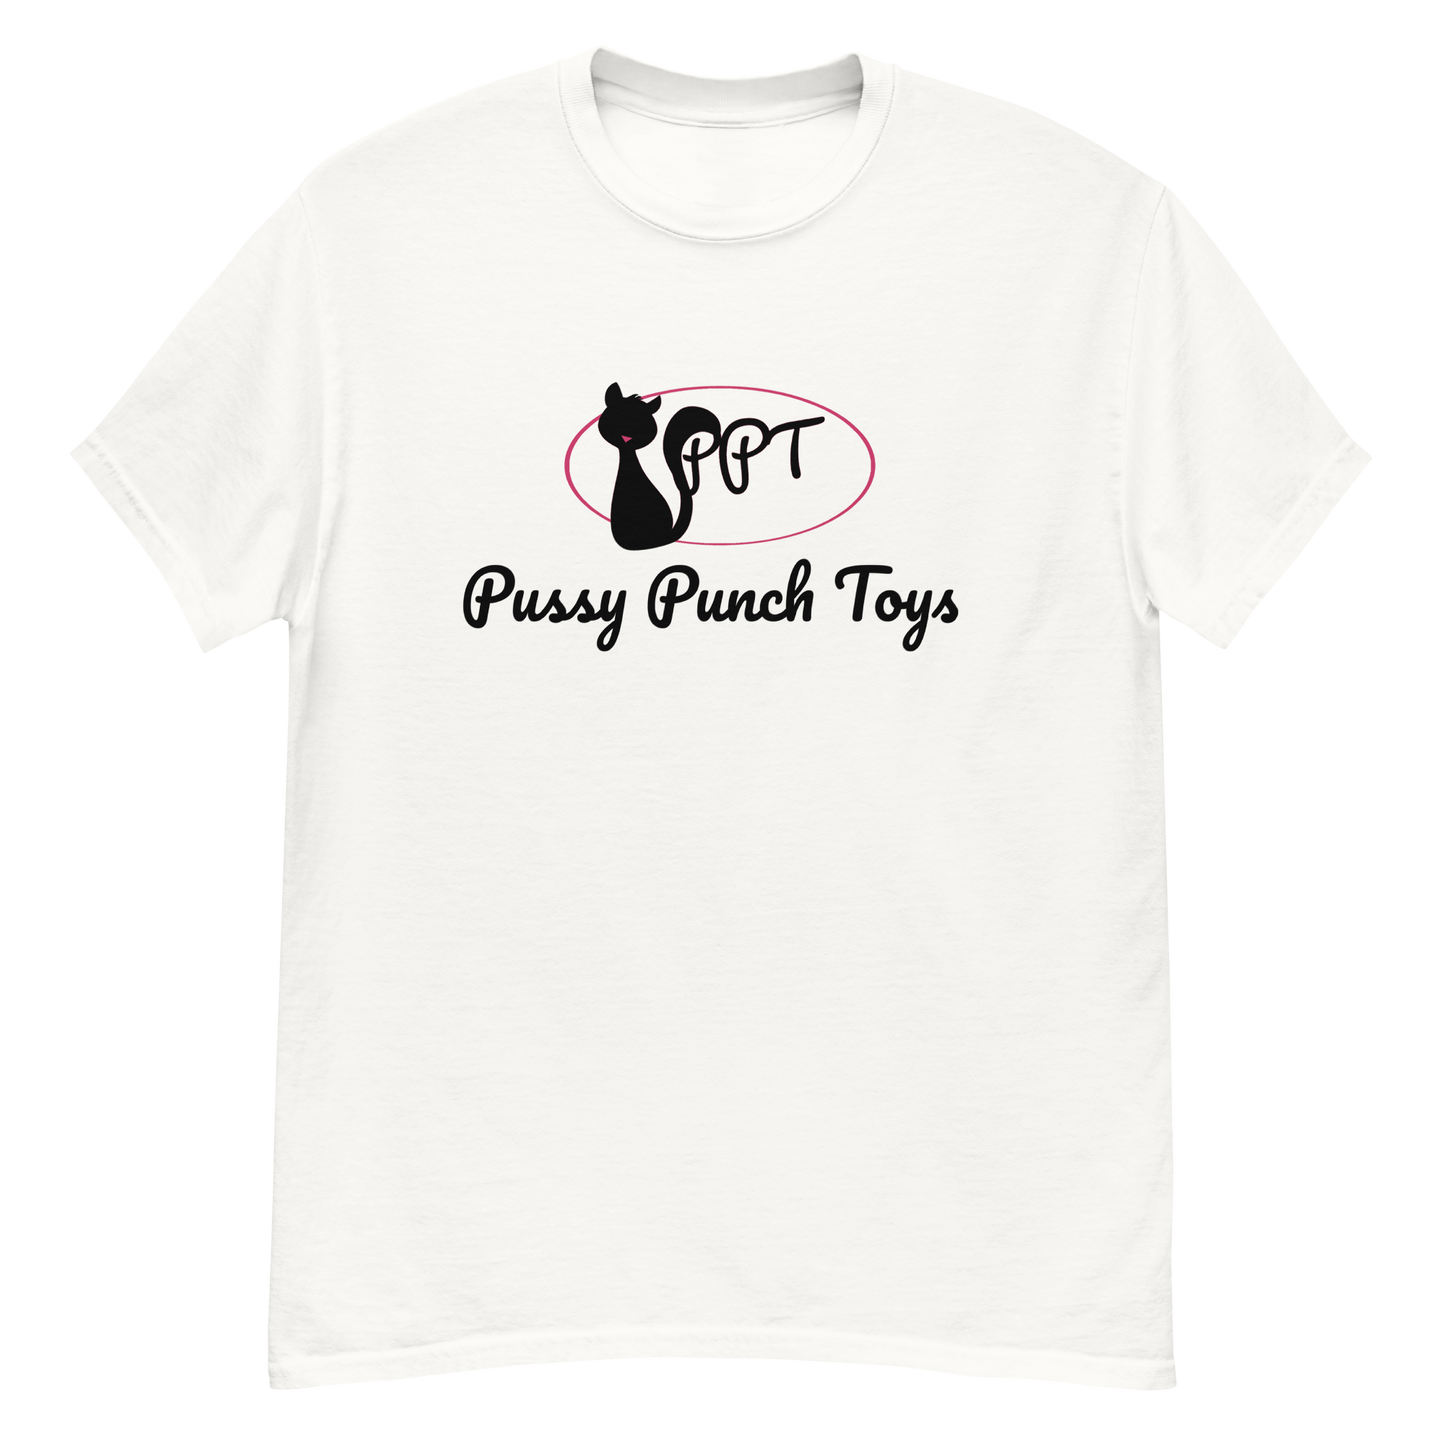 Pussy Punch Toys tee